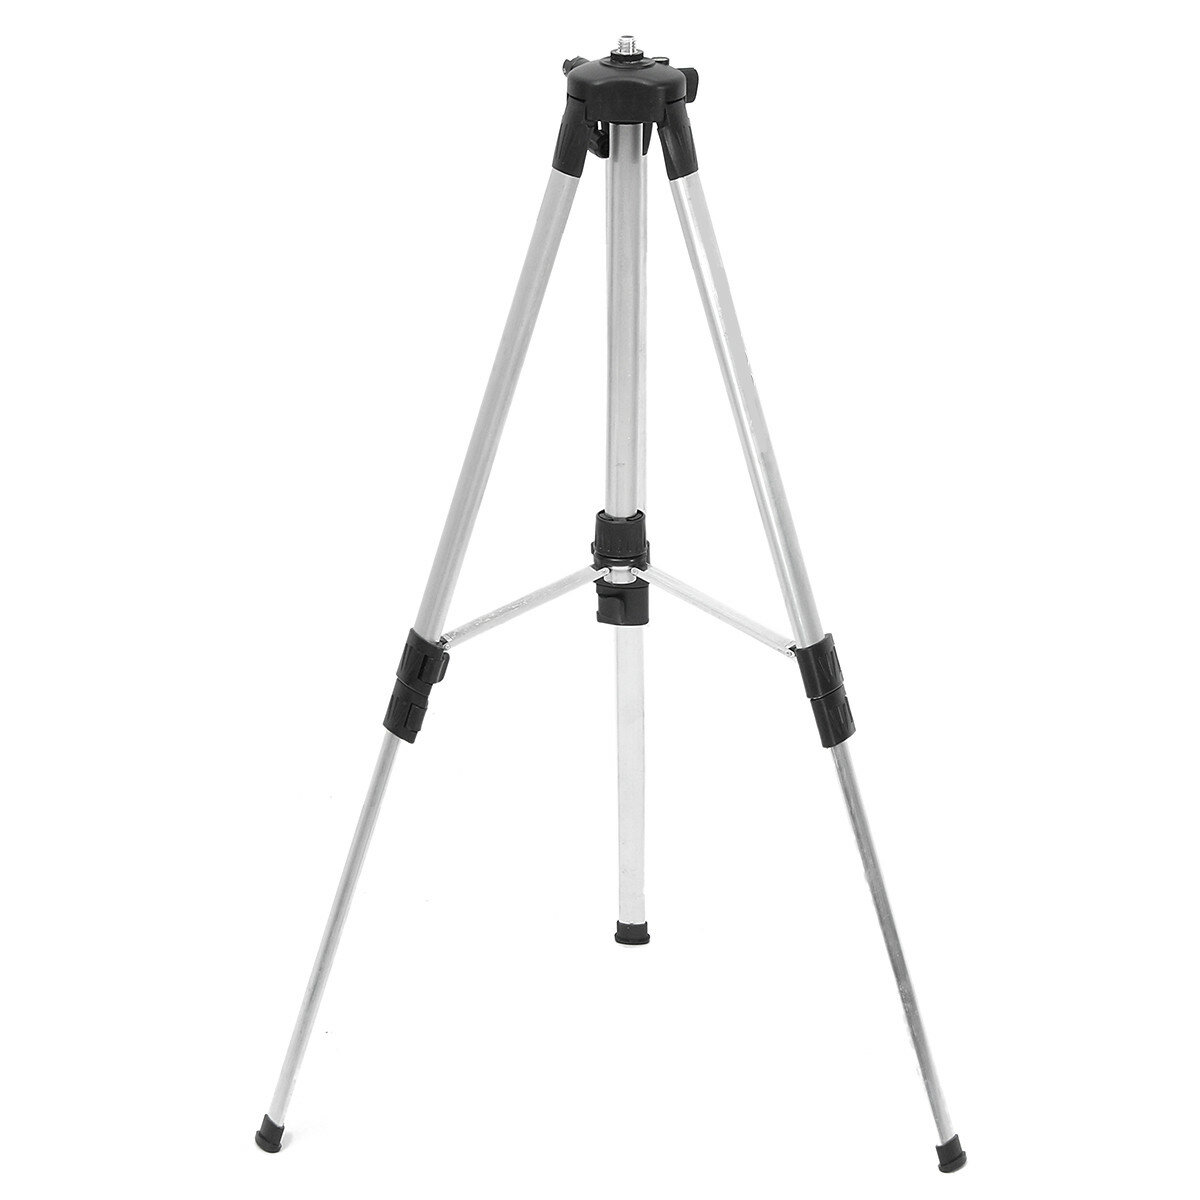 Universal Adjustable Tripod Stand Extension For Laser Level With Storage Bags 